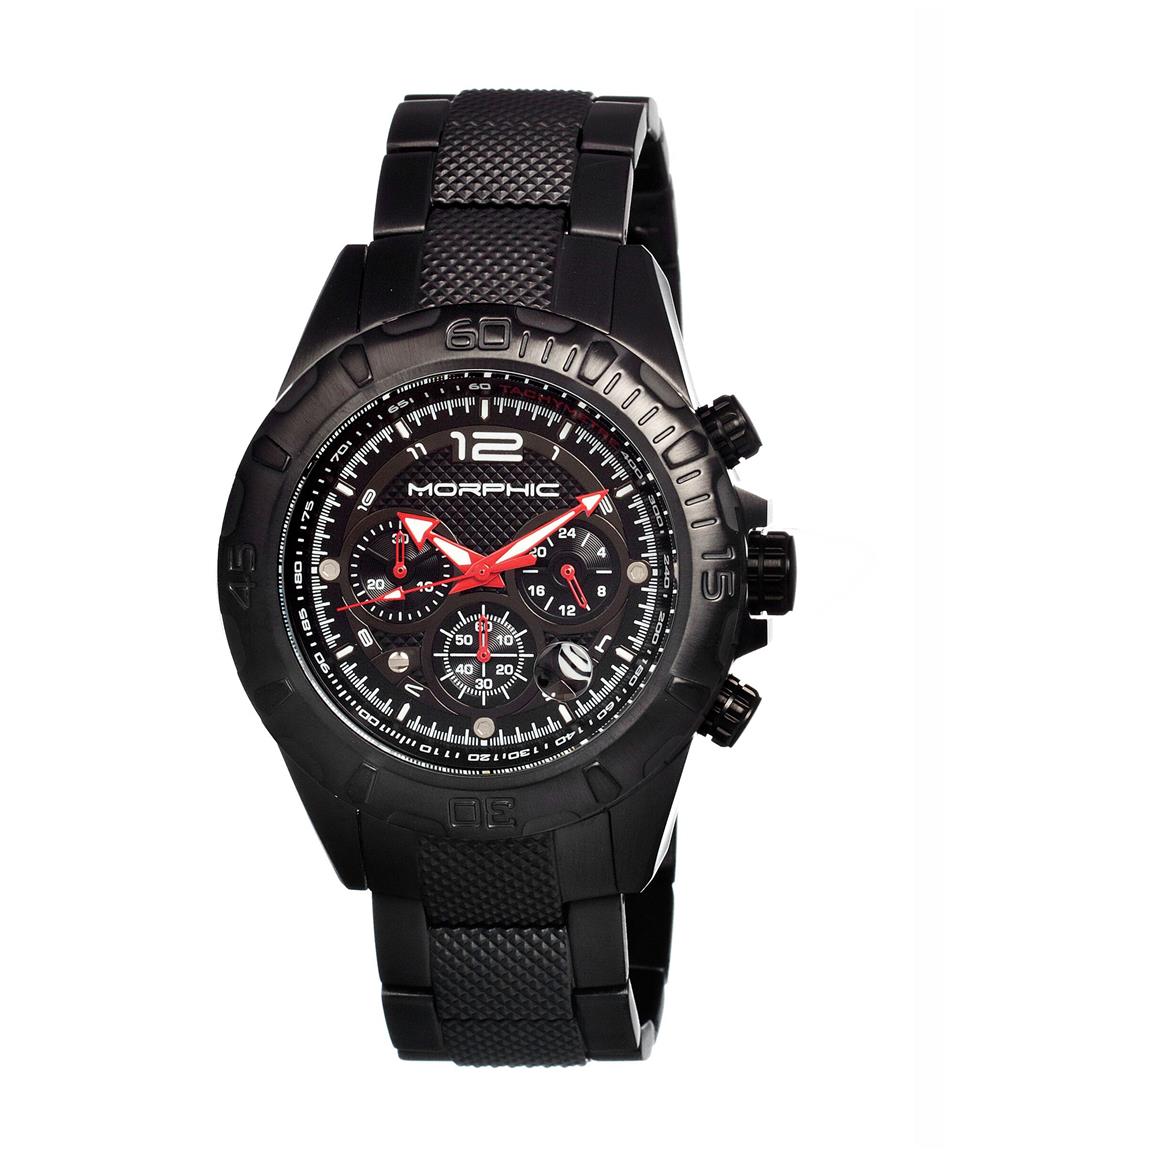 Morphic M17 Series Men's Watch - 668526, Watches at Sportsman's Guide